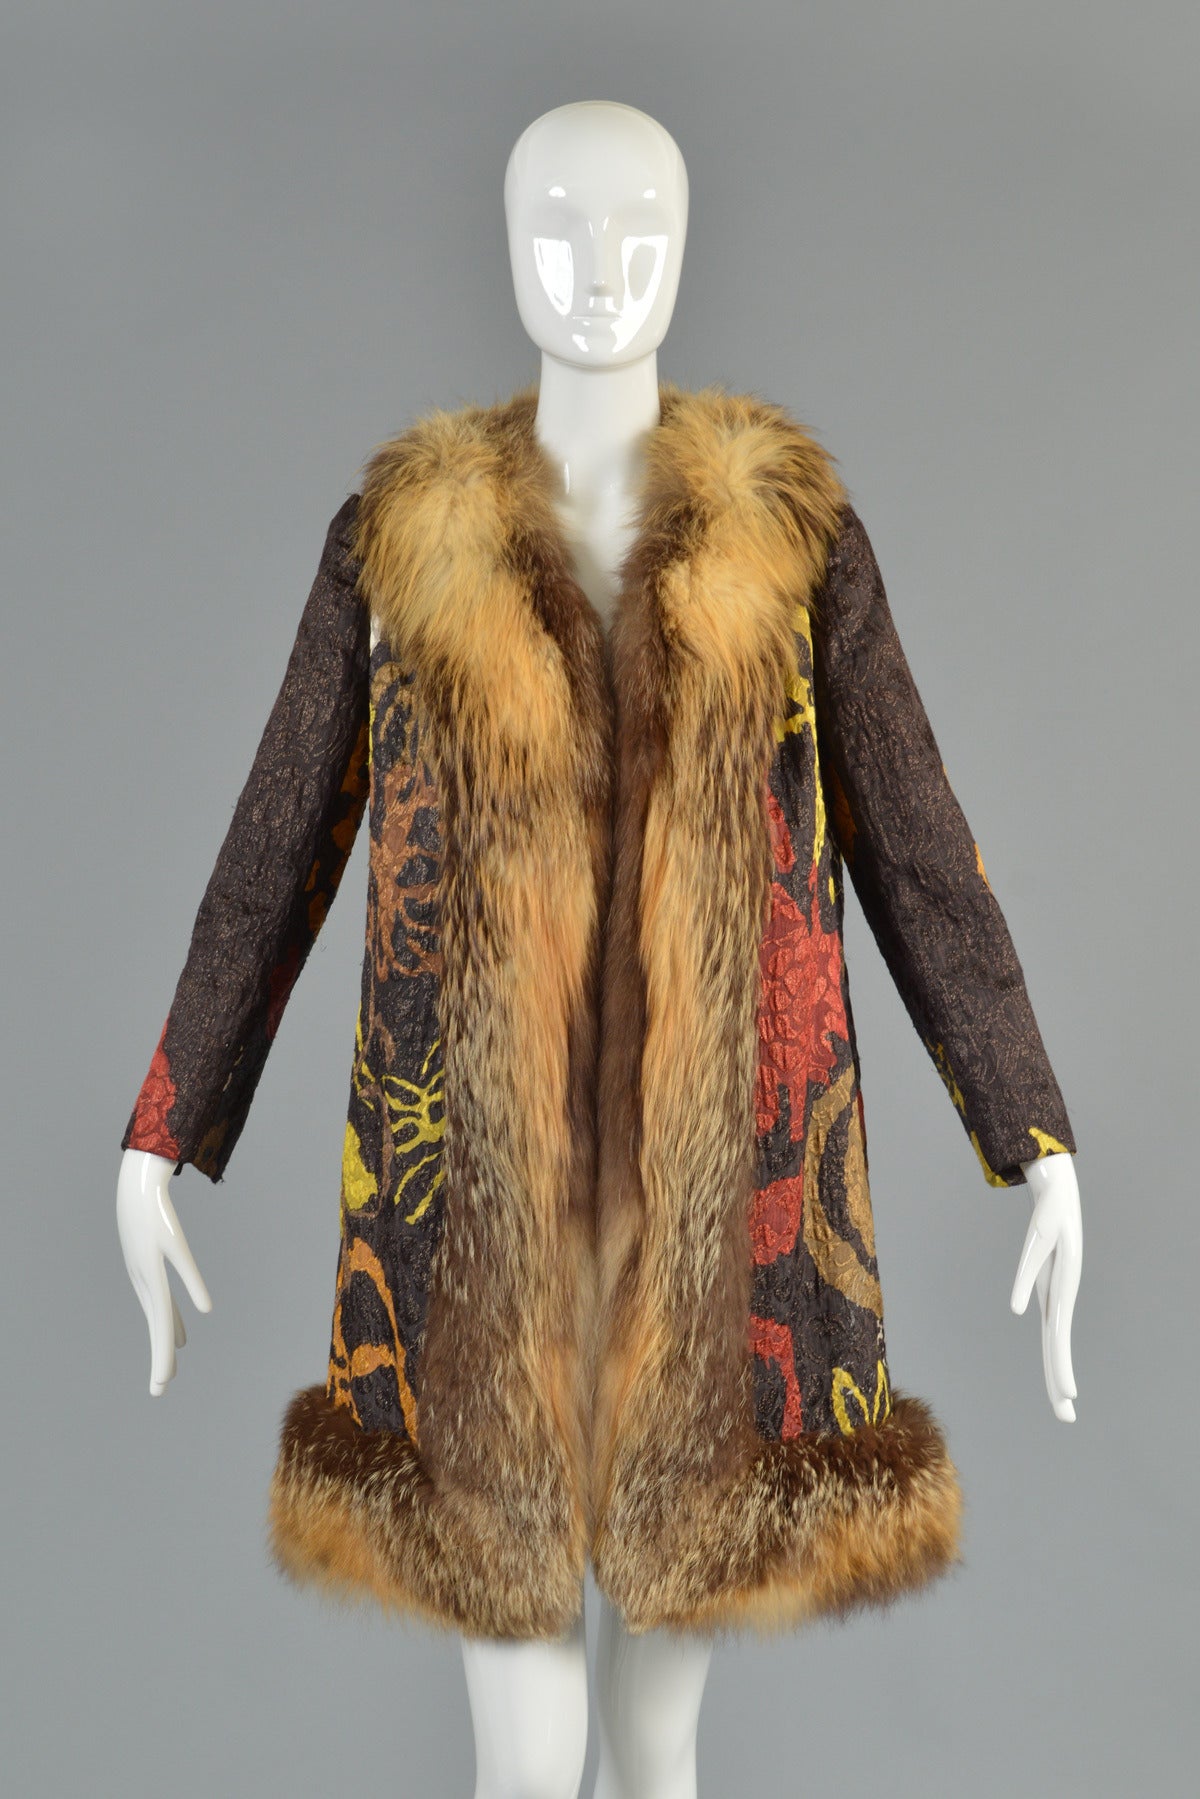 Recently reduced from $1800 to $1200

Iconic late 60s/early 70s vintage Bill Blass jacquard coat with fox trim. Such an incredible and rare find! We can't get over yummy autumnal palette - a flowery bouquet of naturally rich tones like metallic